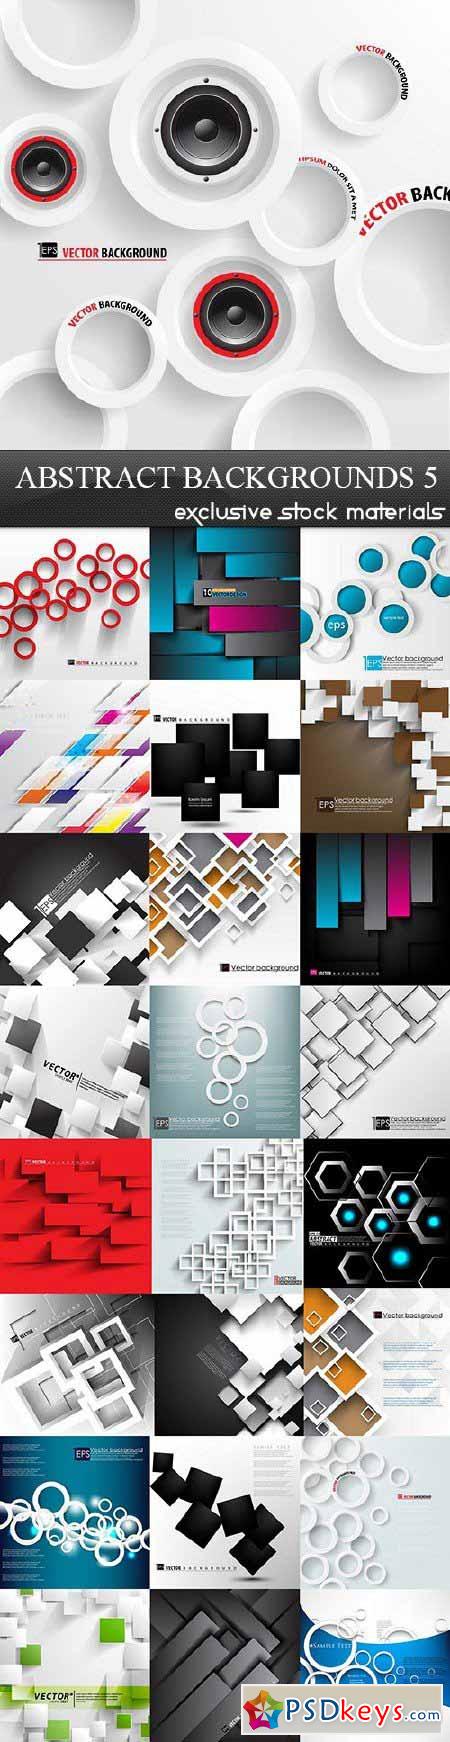 Abstract Backgrounds Vector Set 5